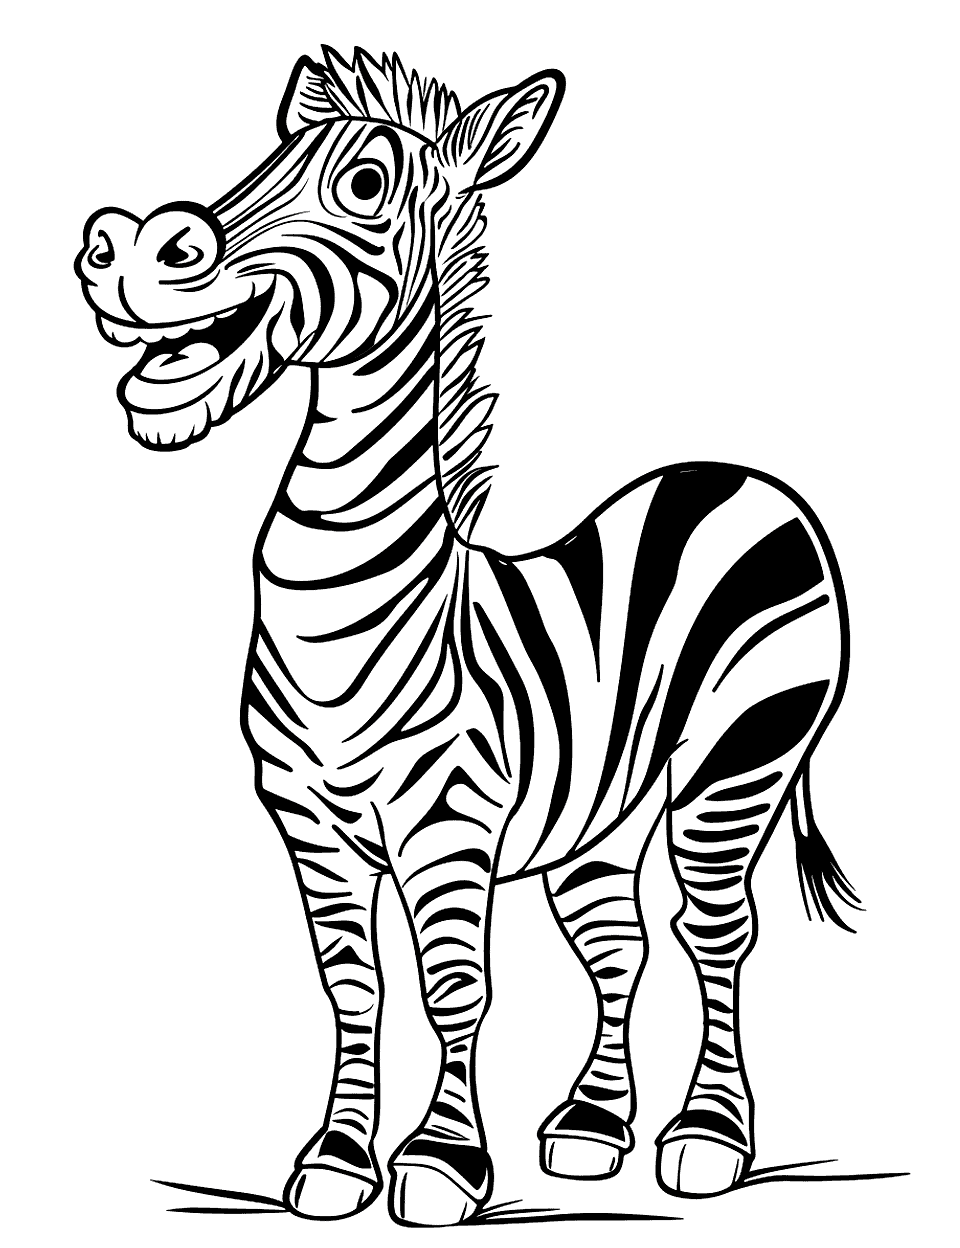 Laughing Zebra Coloring Page - A zebra with its mouth open as if laughing or calling.